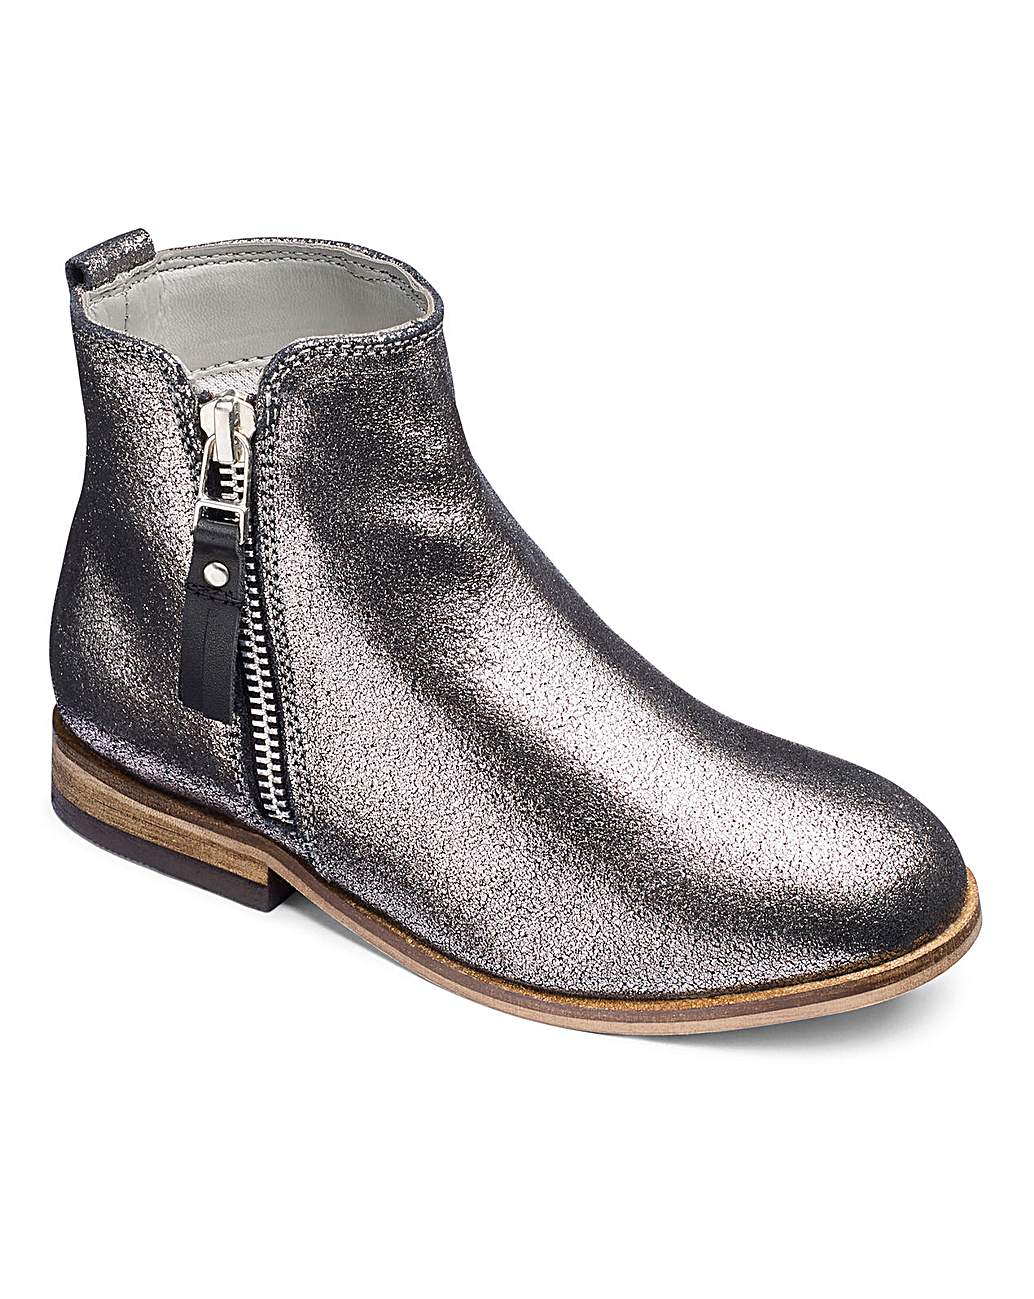 silver girls boots